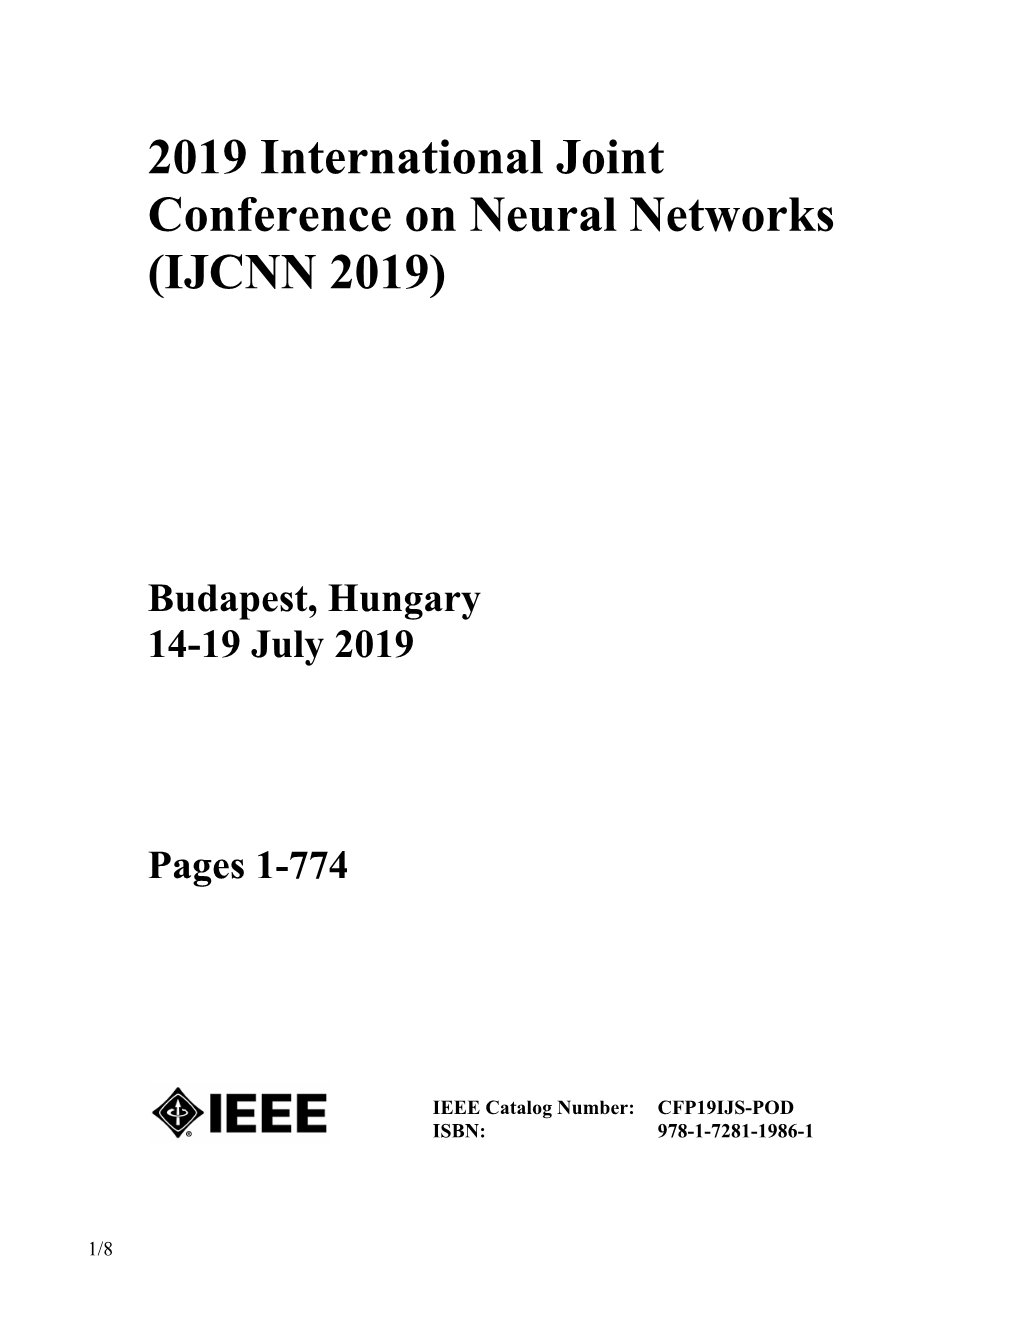 2019 International Joint Conference on Neural Networks (IJCNN 2019)